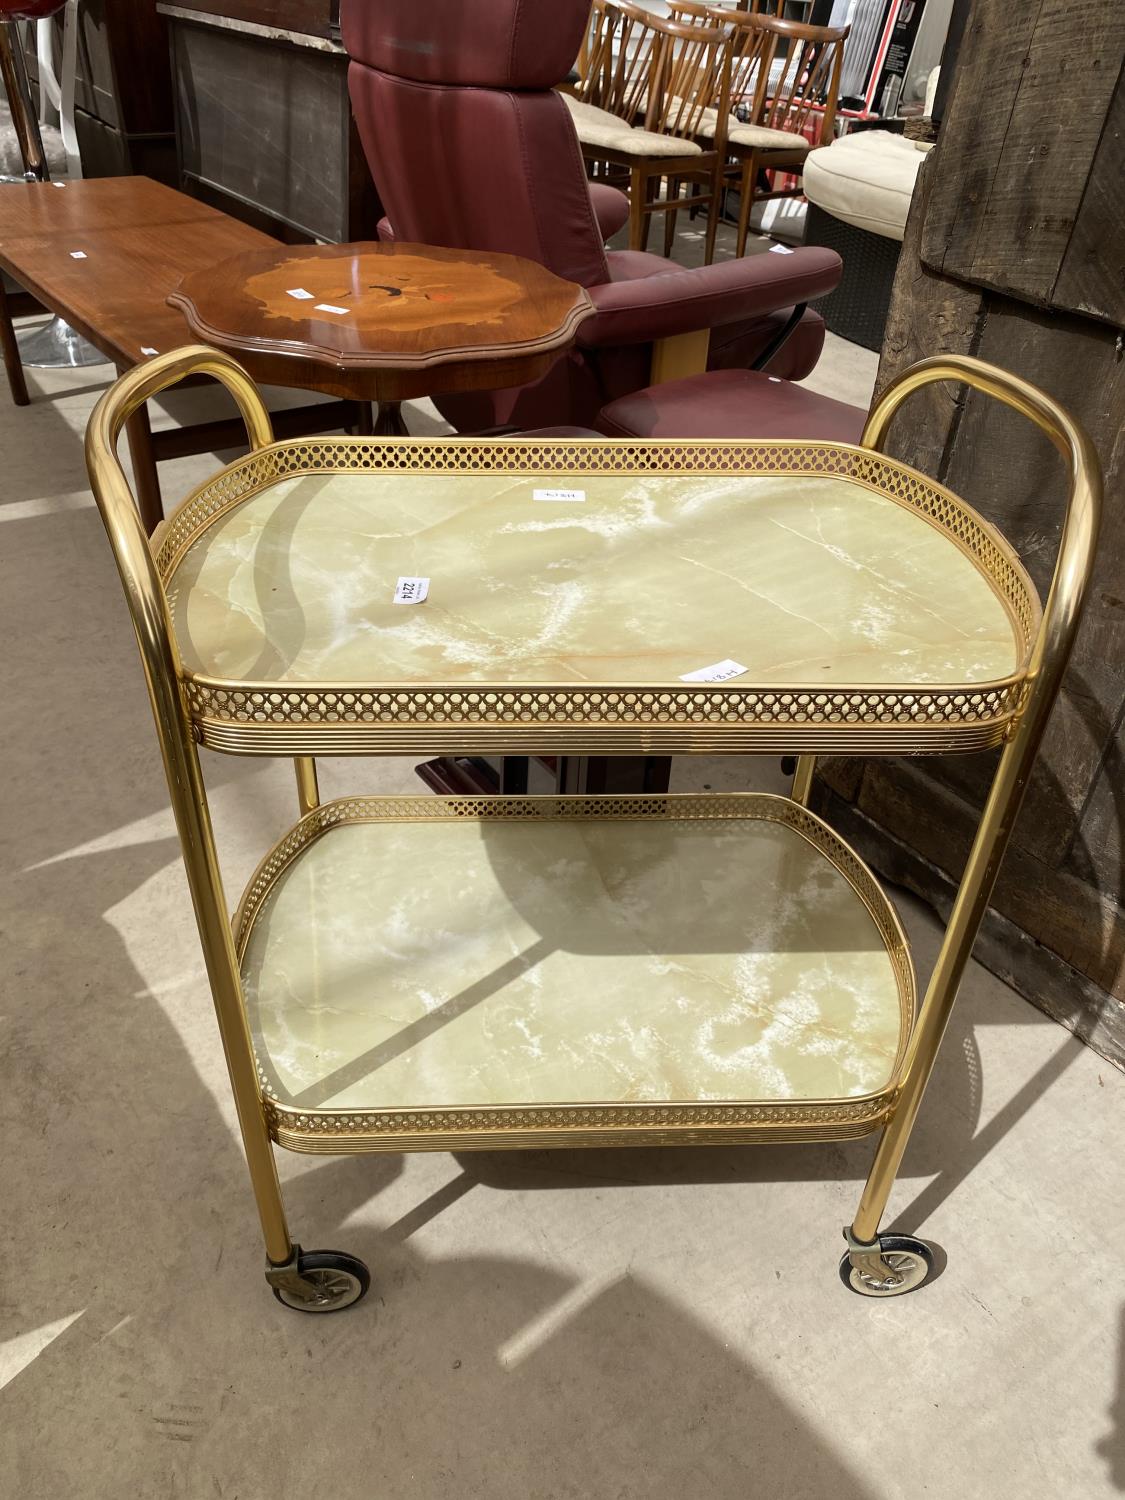 A 1970'S GOLD COLOURED TROLLEY WITH MARBLE EFFECT TILES